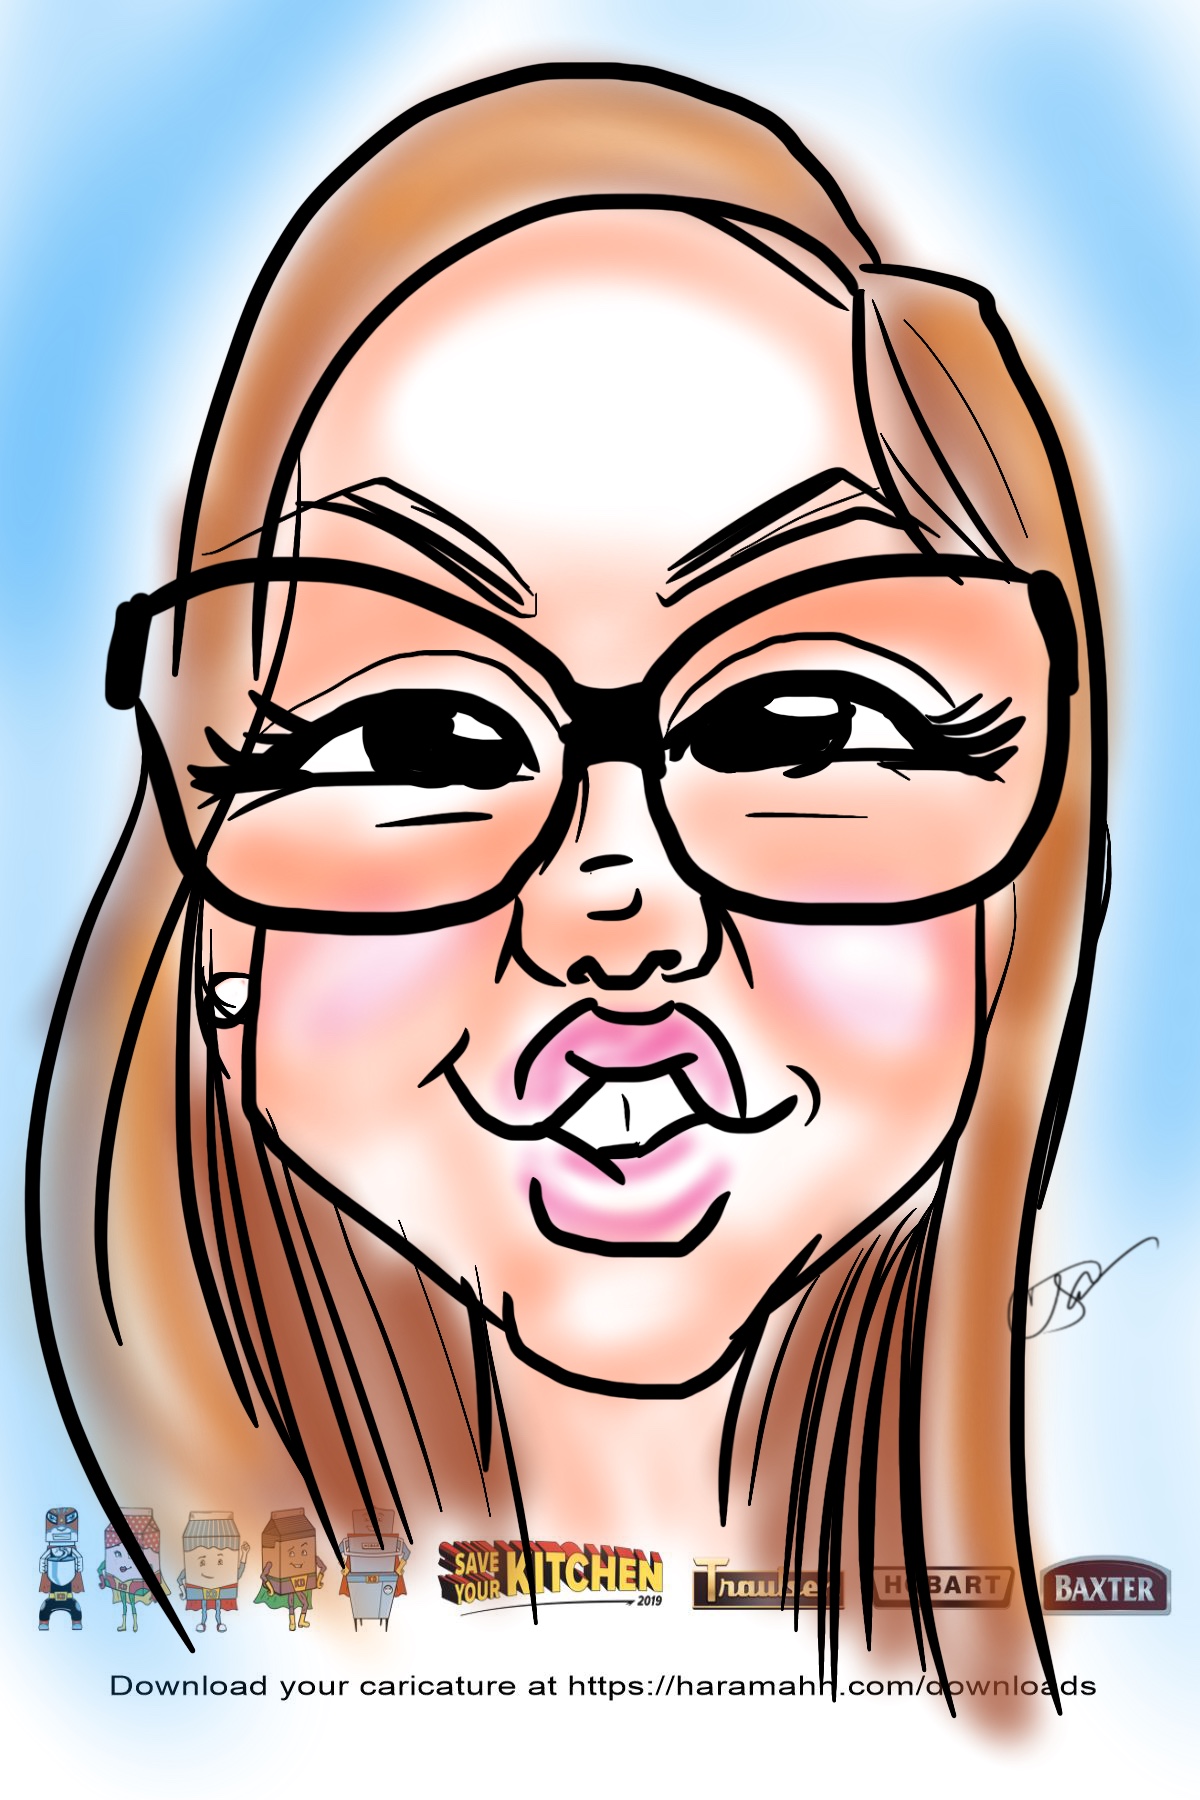 Digital caricature of a woman